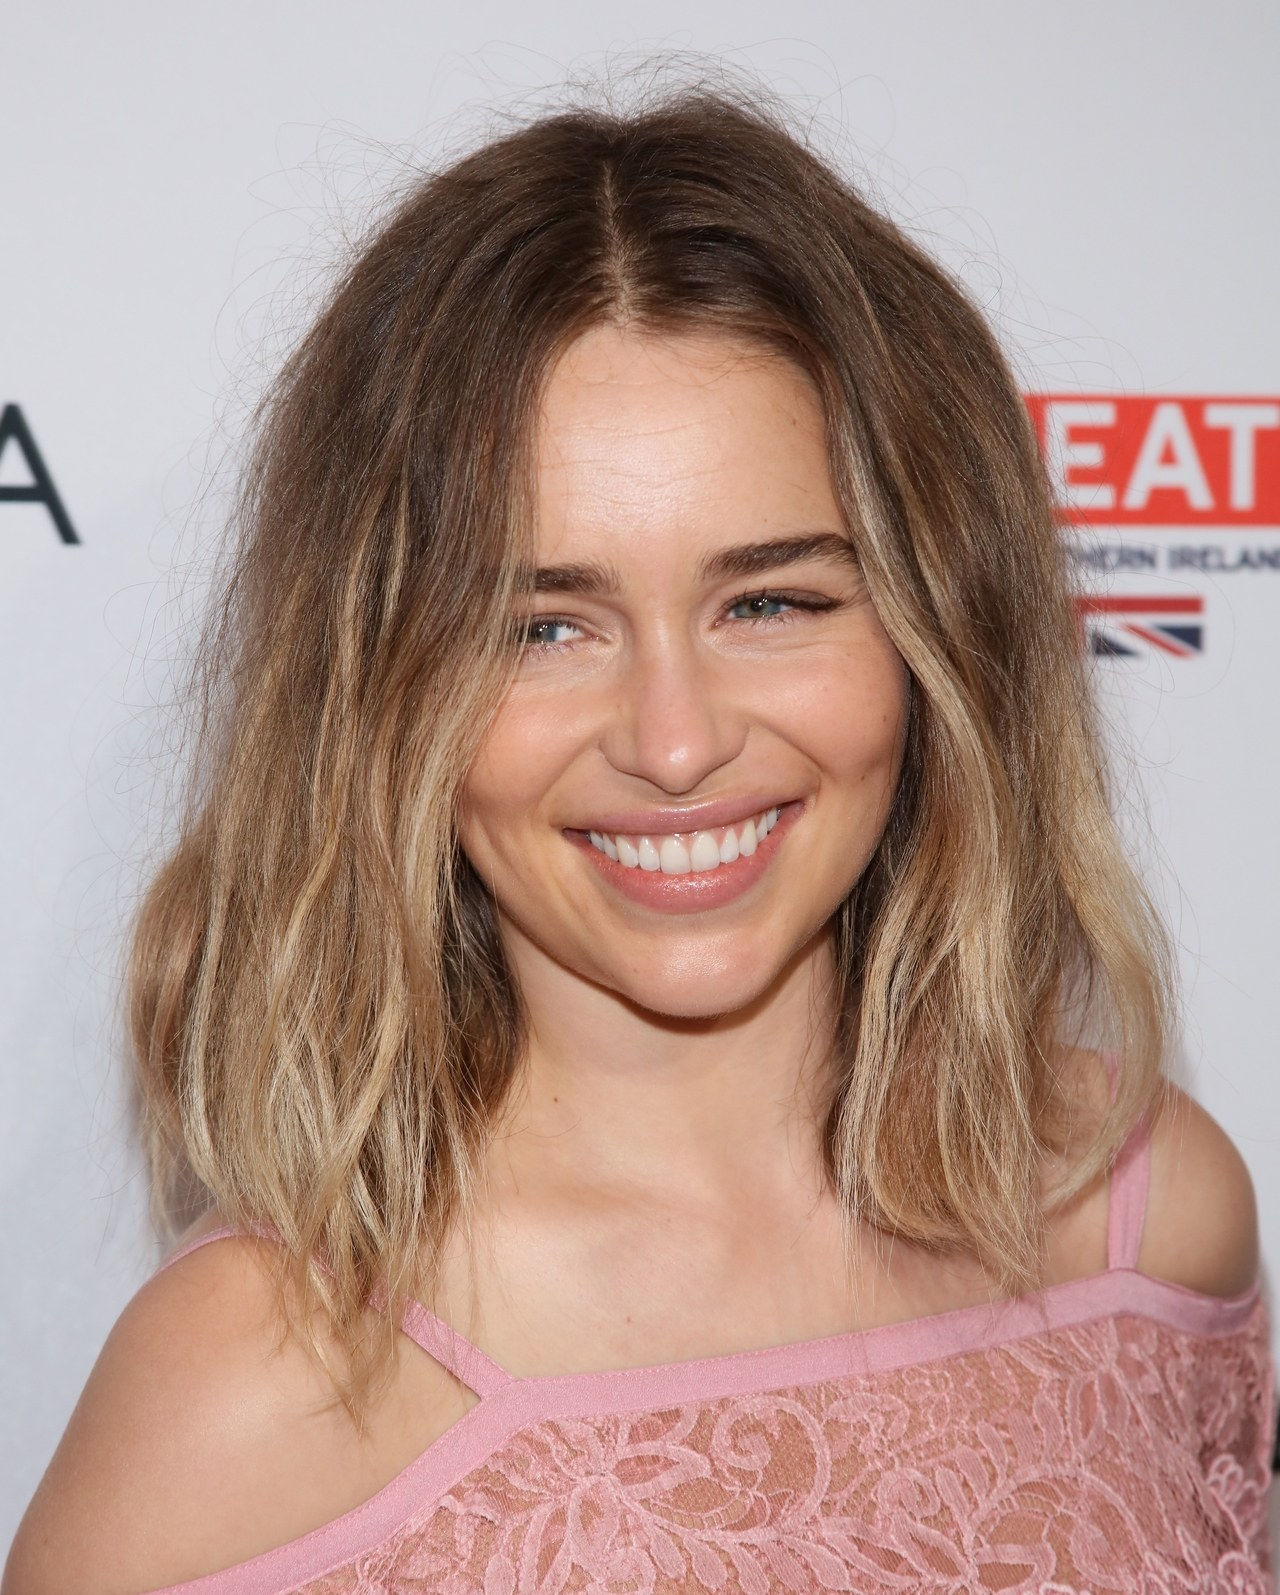 ZÁPAD HOLLYWOOD, CA - SEPTEMBER 17: Actress Emilia Clarke attends the BBC America BAFTA Los Angeles TV Tea Party at The London Hotel on September 17, 2016 in West Hollywood, California. (Photo by JB Lacroix/WireImage)